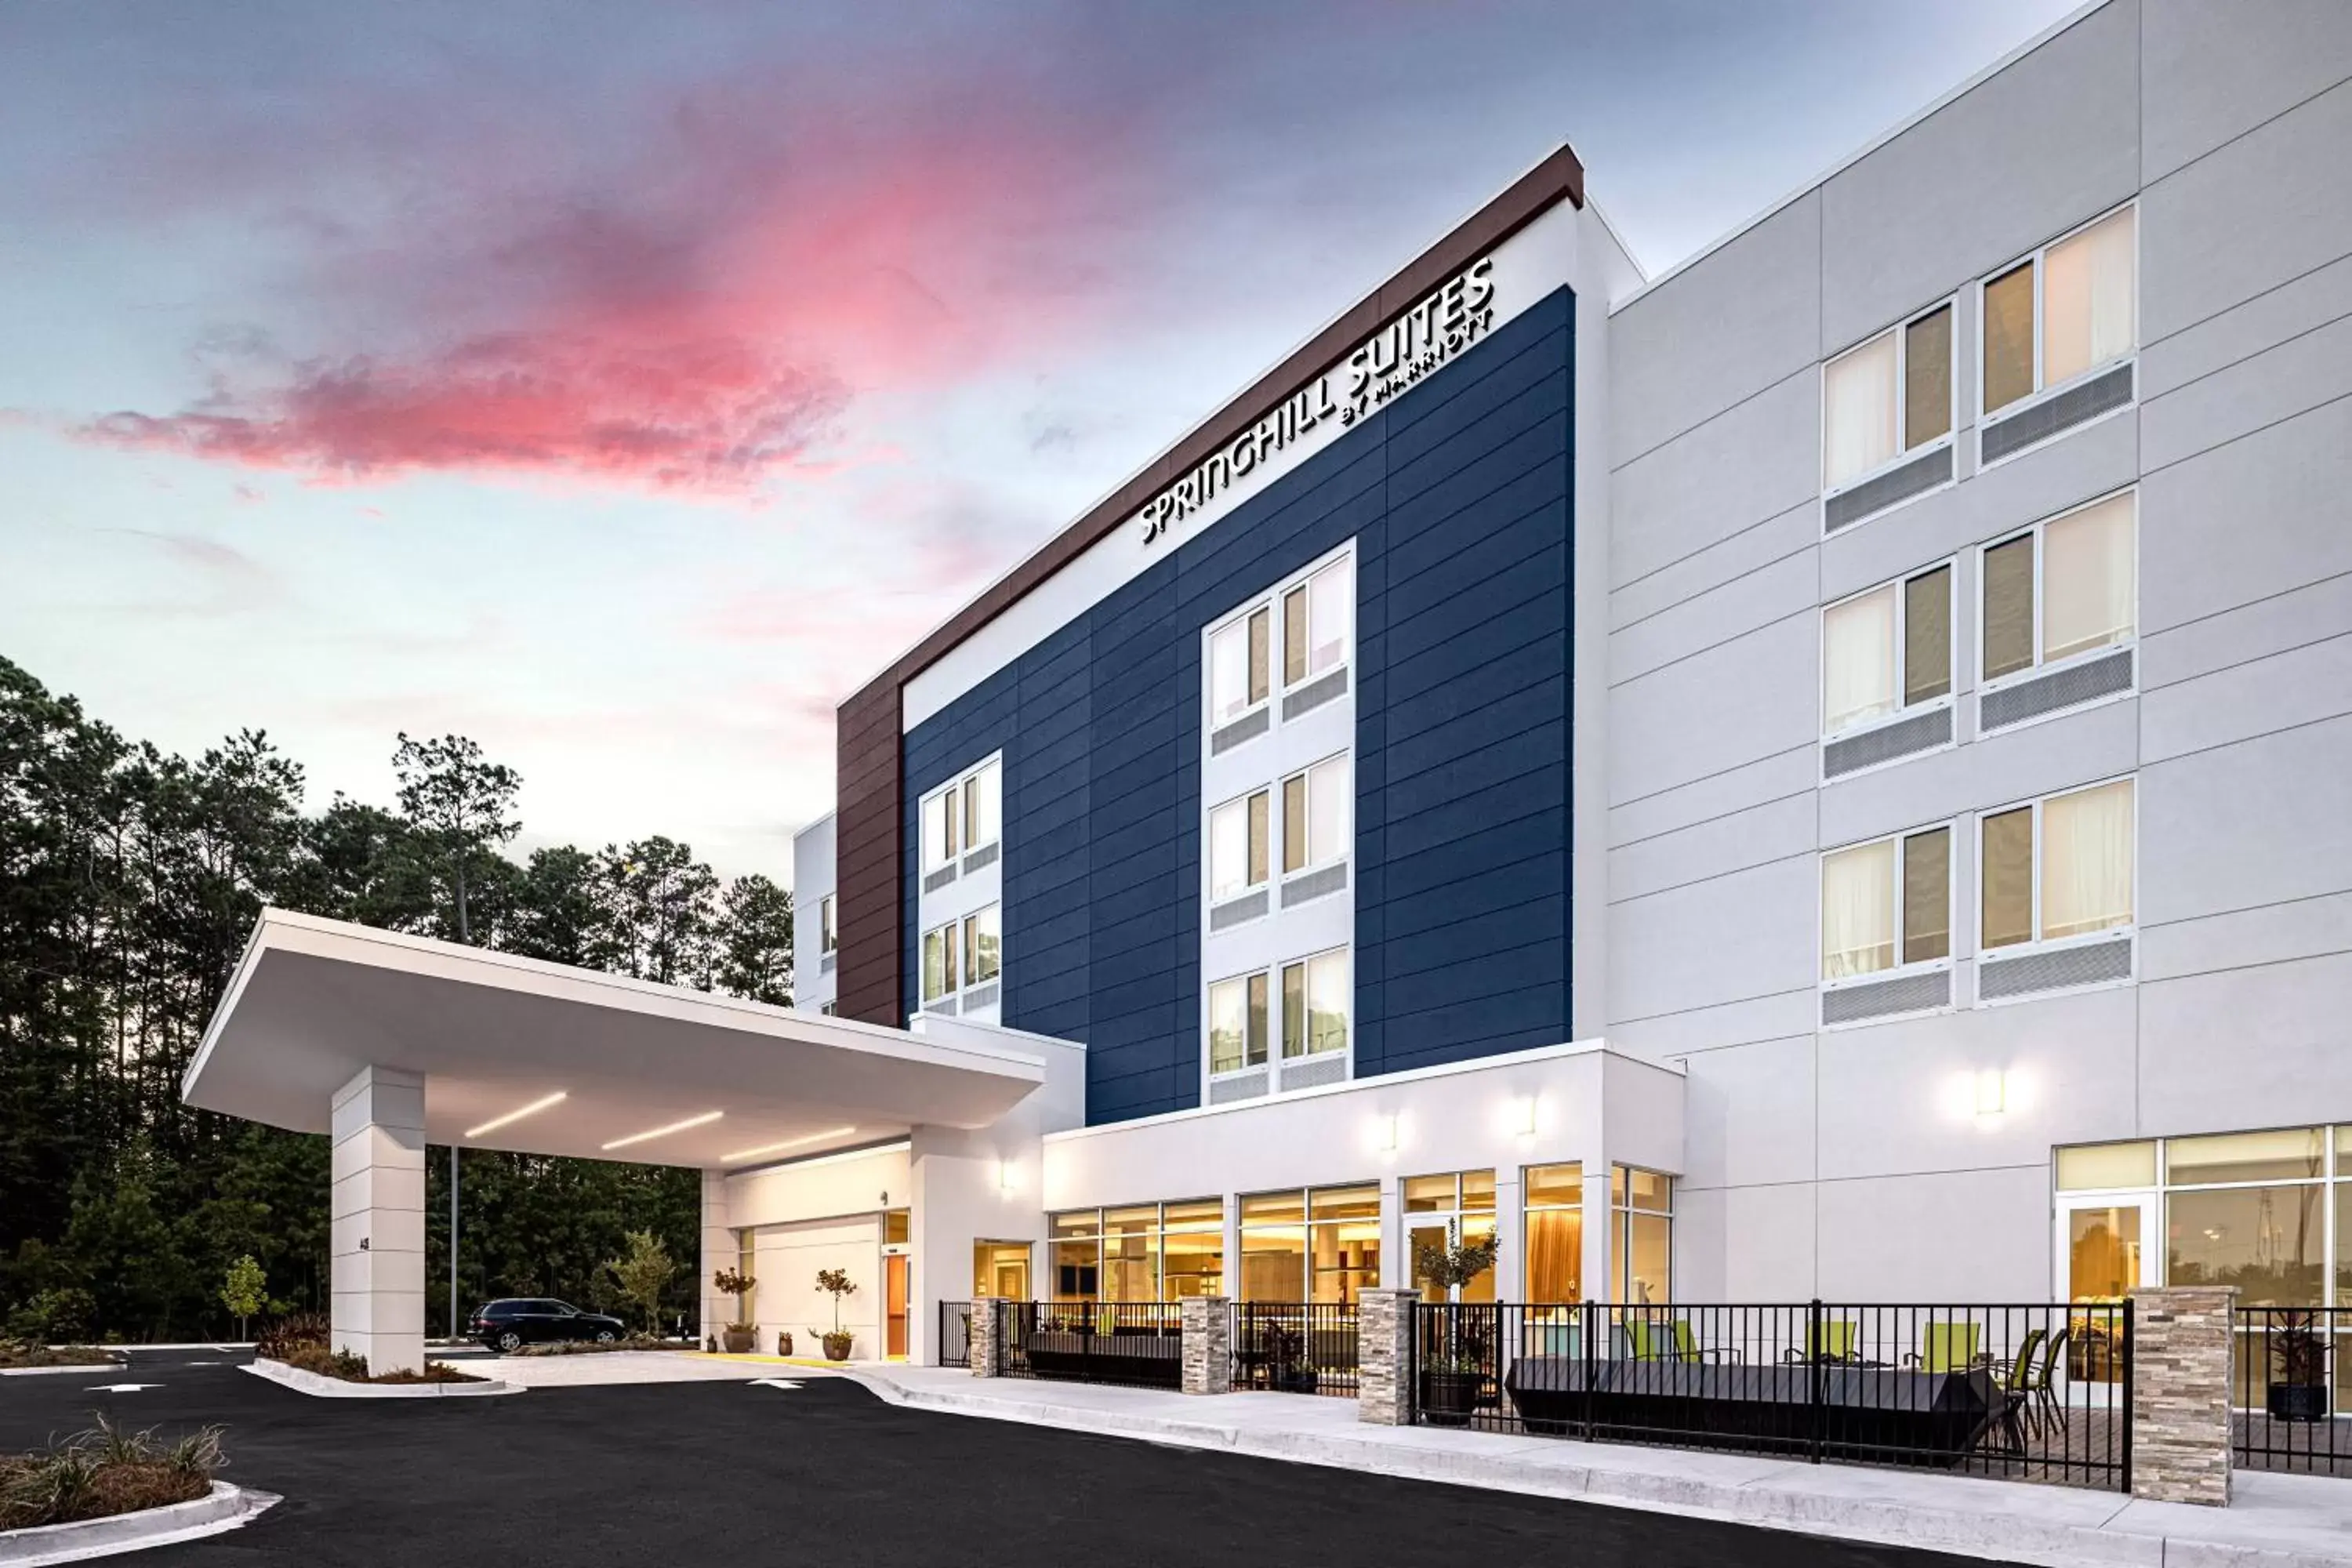 Property Building in SpringHill Suites by Marriott Savannah Richmond Hill